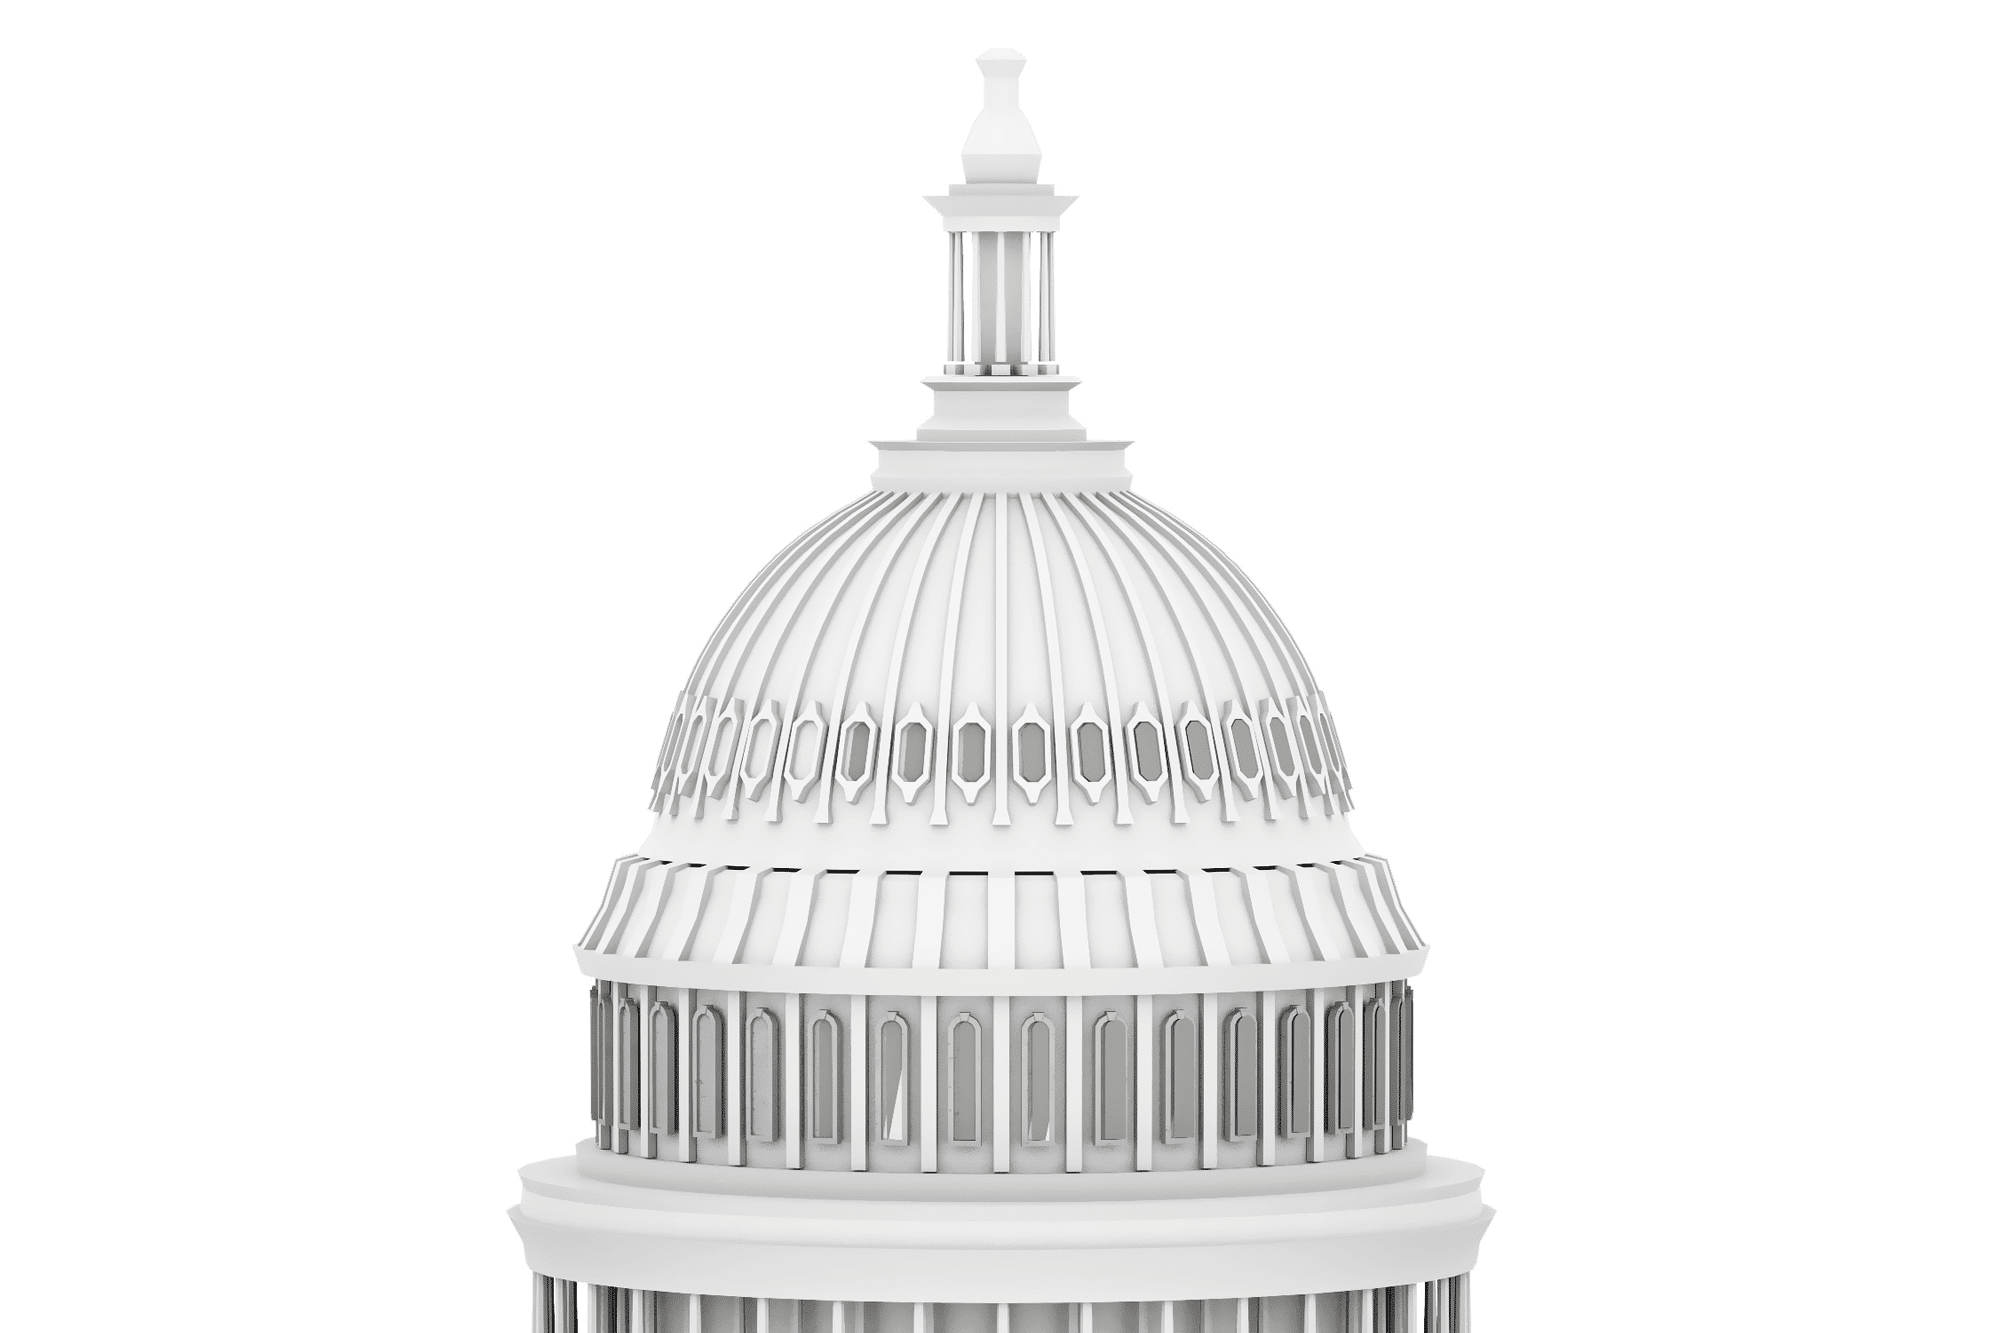 A 3d model of the capitol building in Washington, DC showcasing its parking facilities for mobility.